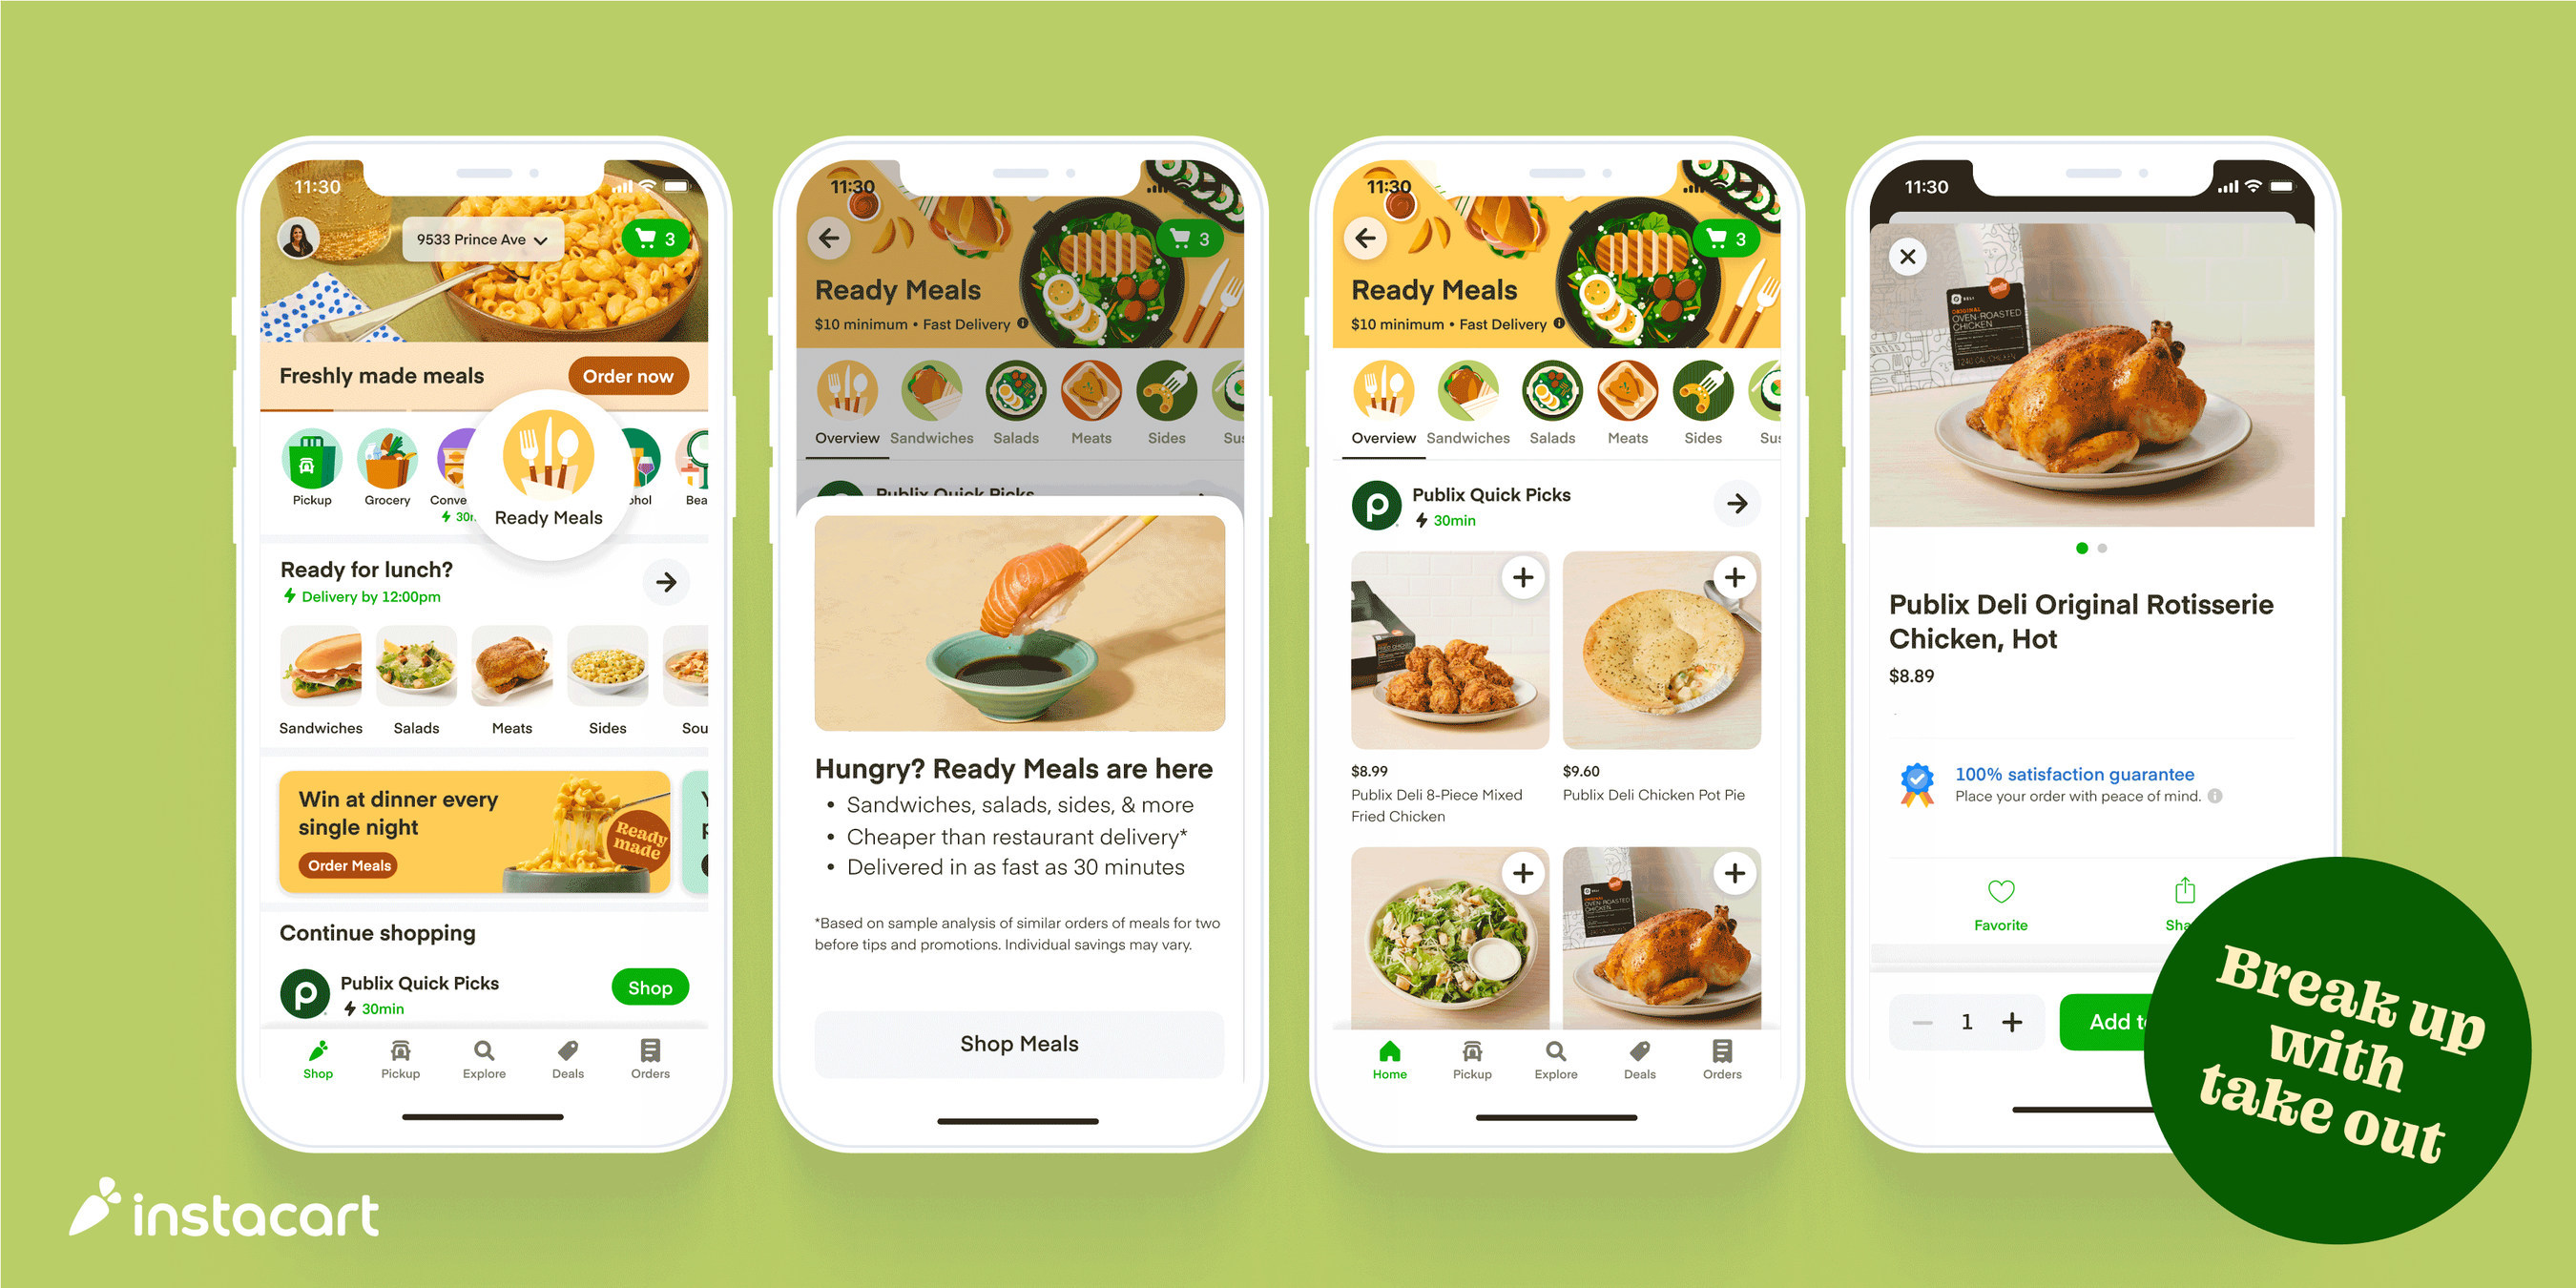 Instacart Launches Ready Meals Hub Featuring Prepared Food from Top Grocers Across the U.S.